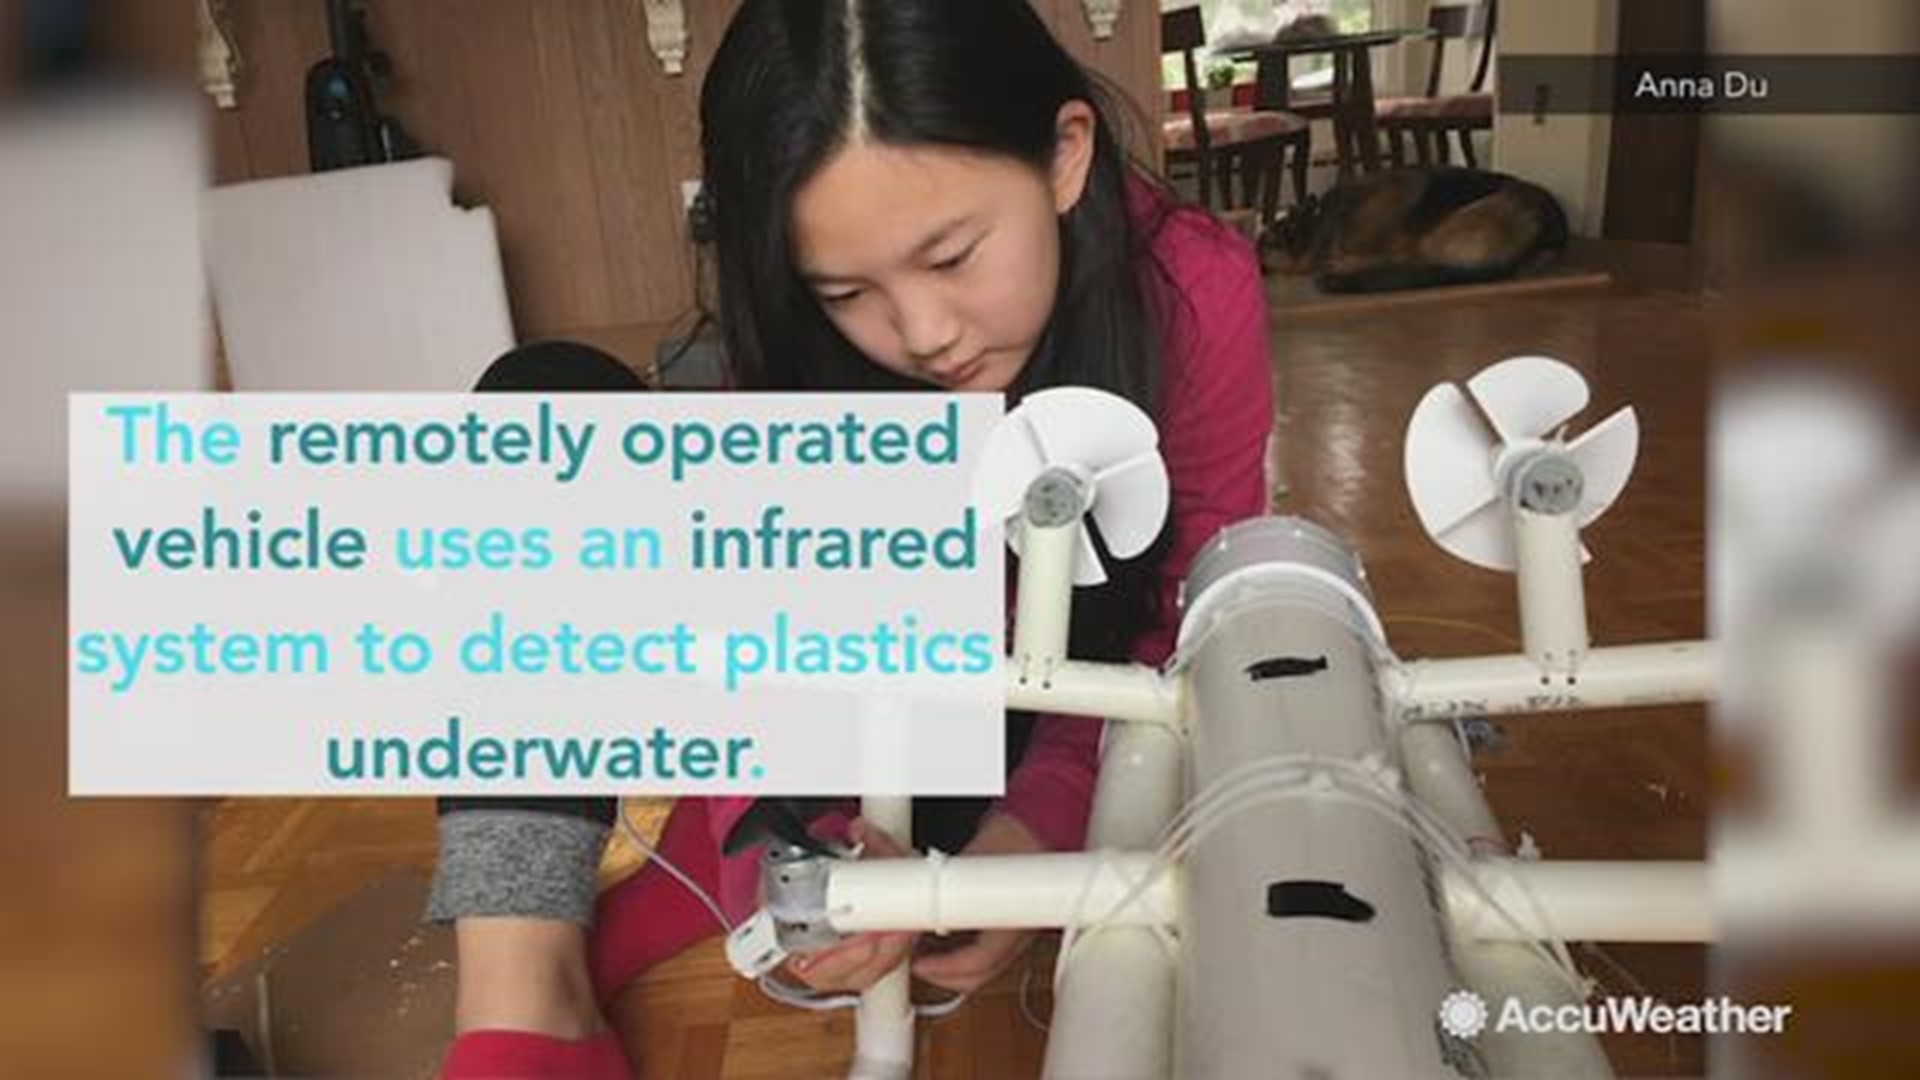 Twelve-year-old Anna Du created a cool device that will help scientists detect and photograph microplastic particles polluting the ocean.